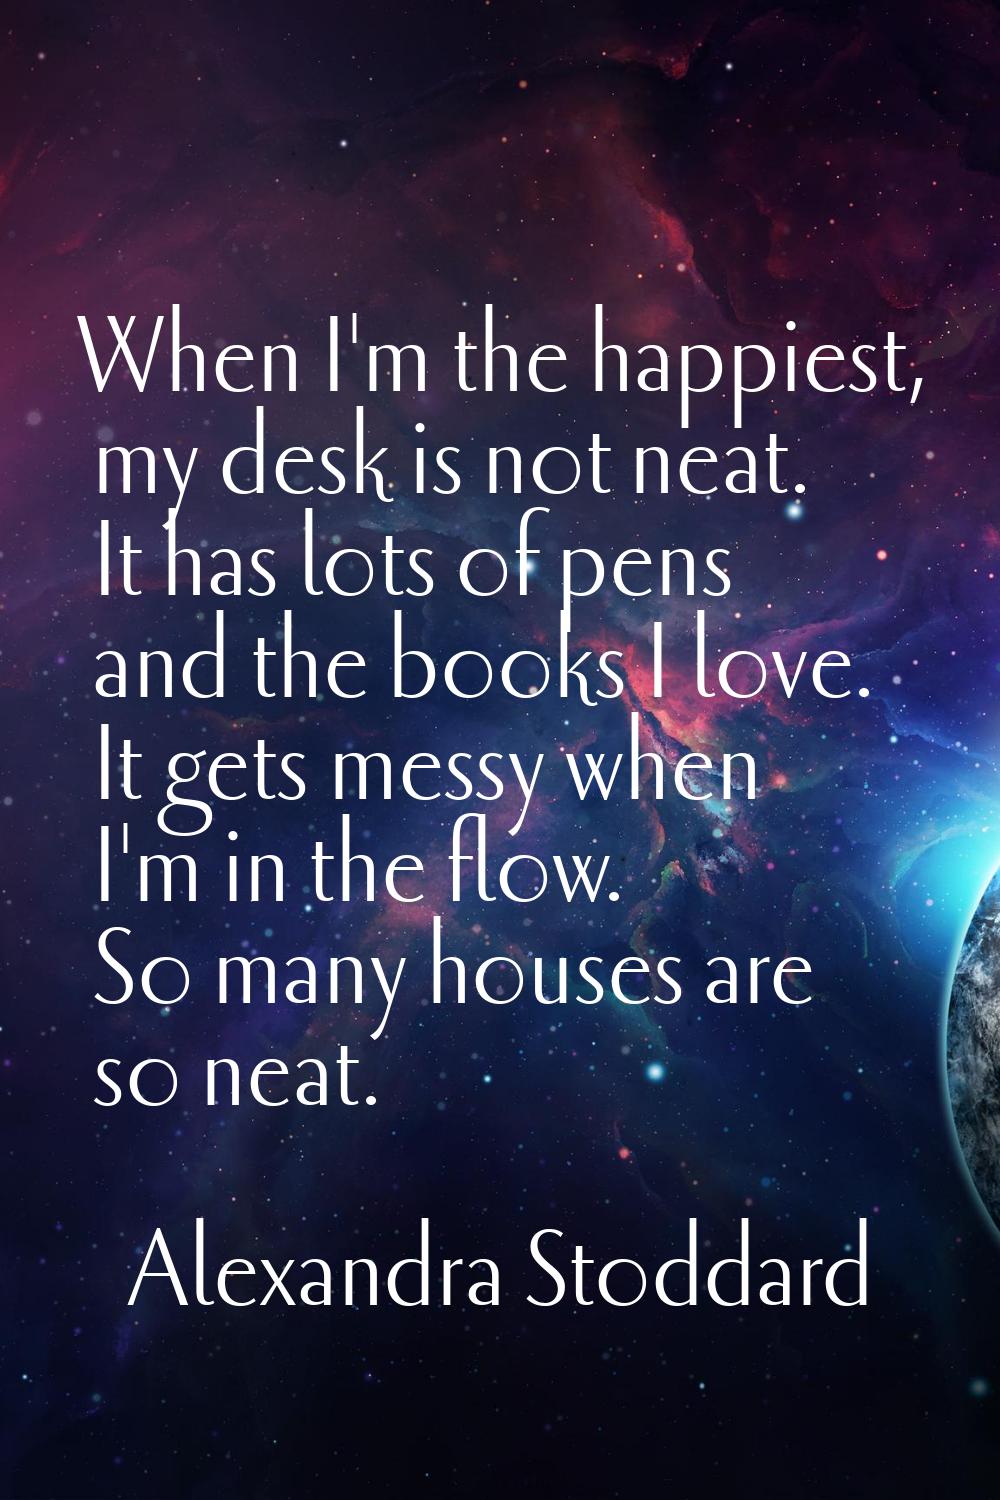 When I'm the happiest, my desk is not neat. It has lots of pens and the books I love. It gets messy